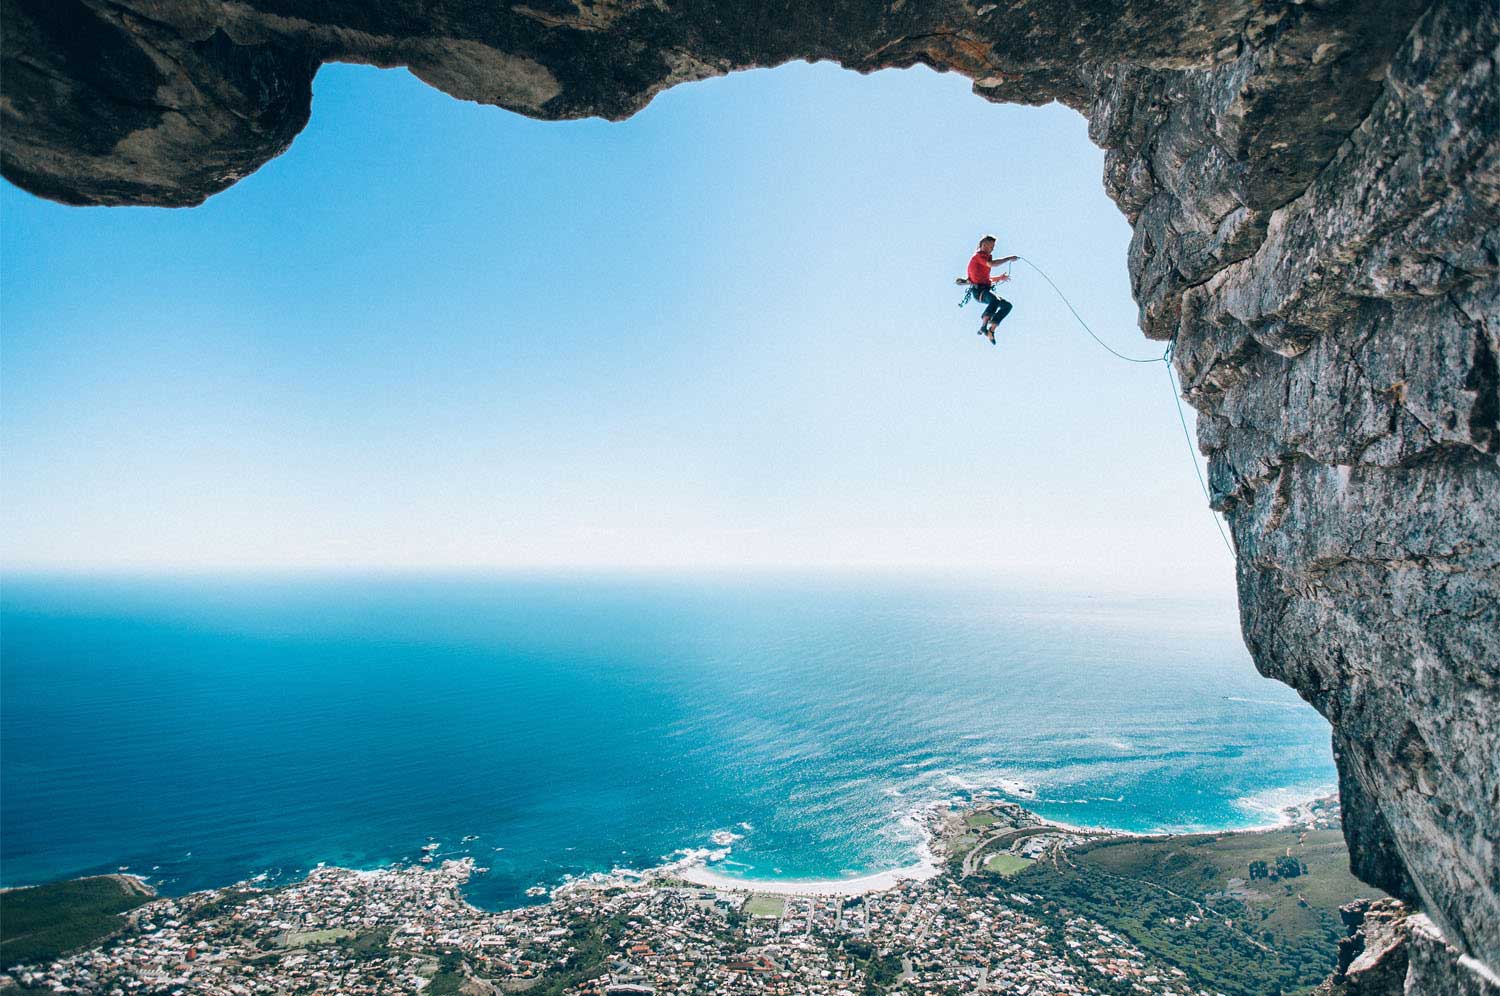 Photographer: Micky Wiswedel Red Bull Illume 2016 Category: Wings Athlete: Jamie Smith Location: Cape Town, South Africa